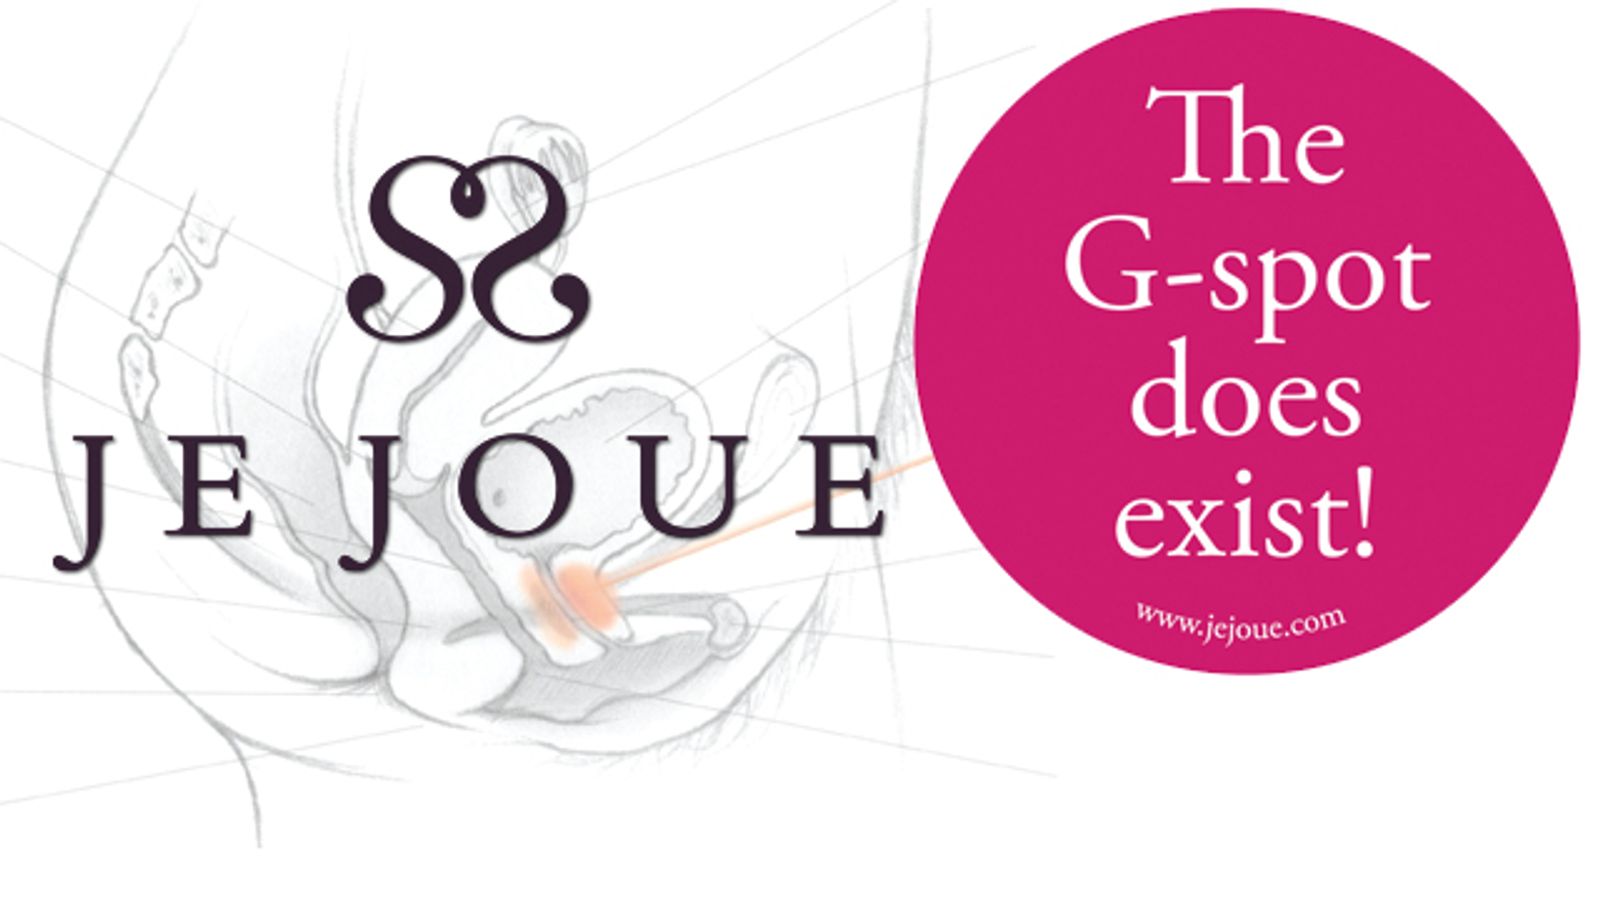 Je Joue Aims for G-Spot in New Campaign